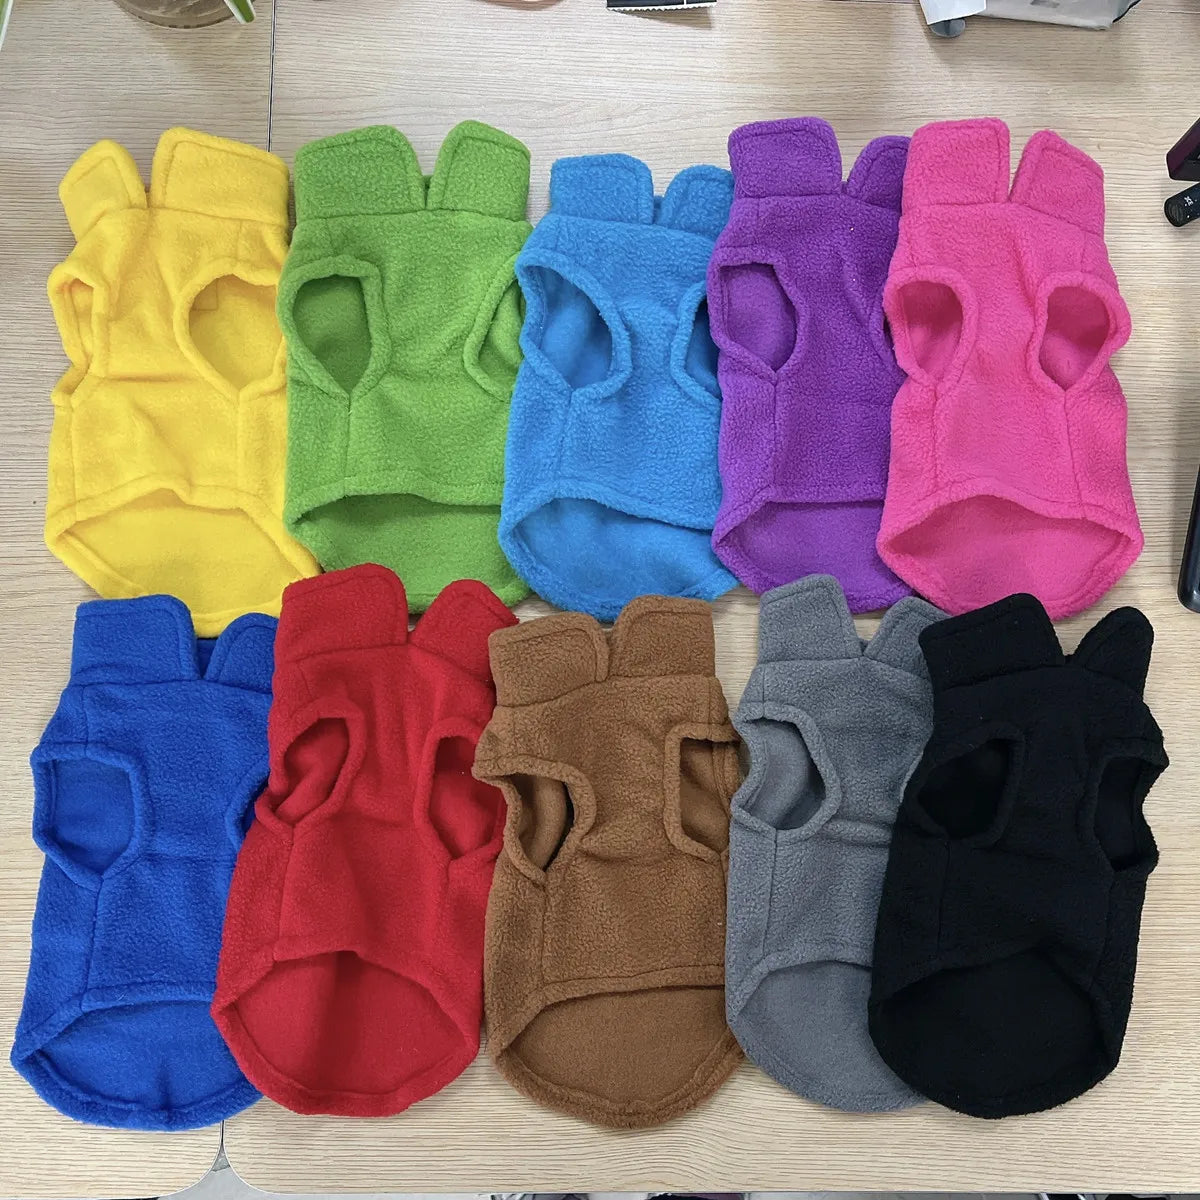 Warm Fleece Pet Clothes Solid Color Coat For Small Medium Dog Soft Cat Puppy Shirt Jacket Teddy Bulldog Chihuahua Winter Outfit